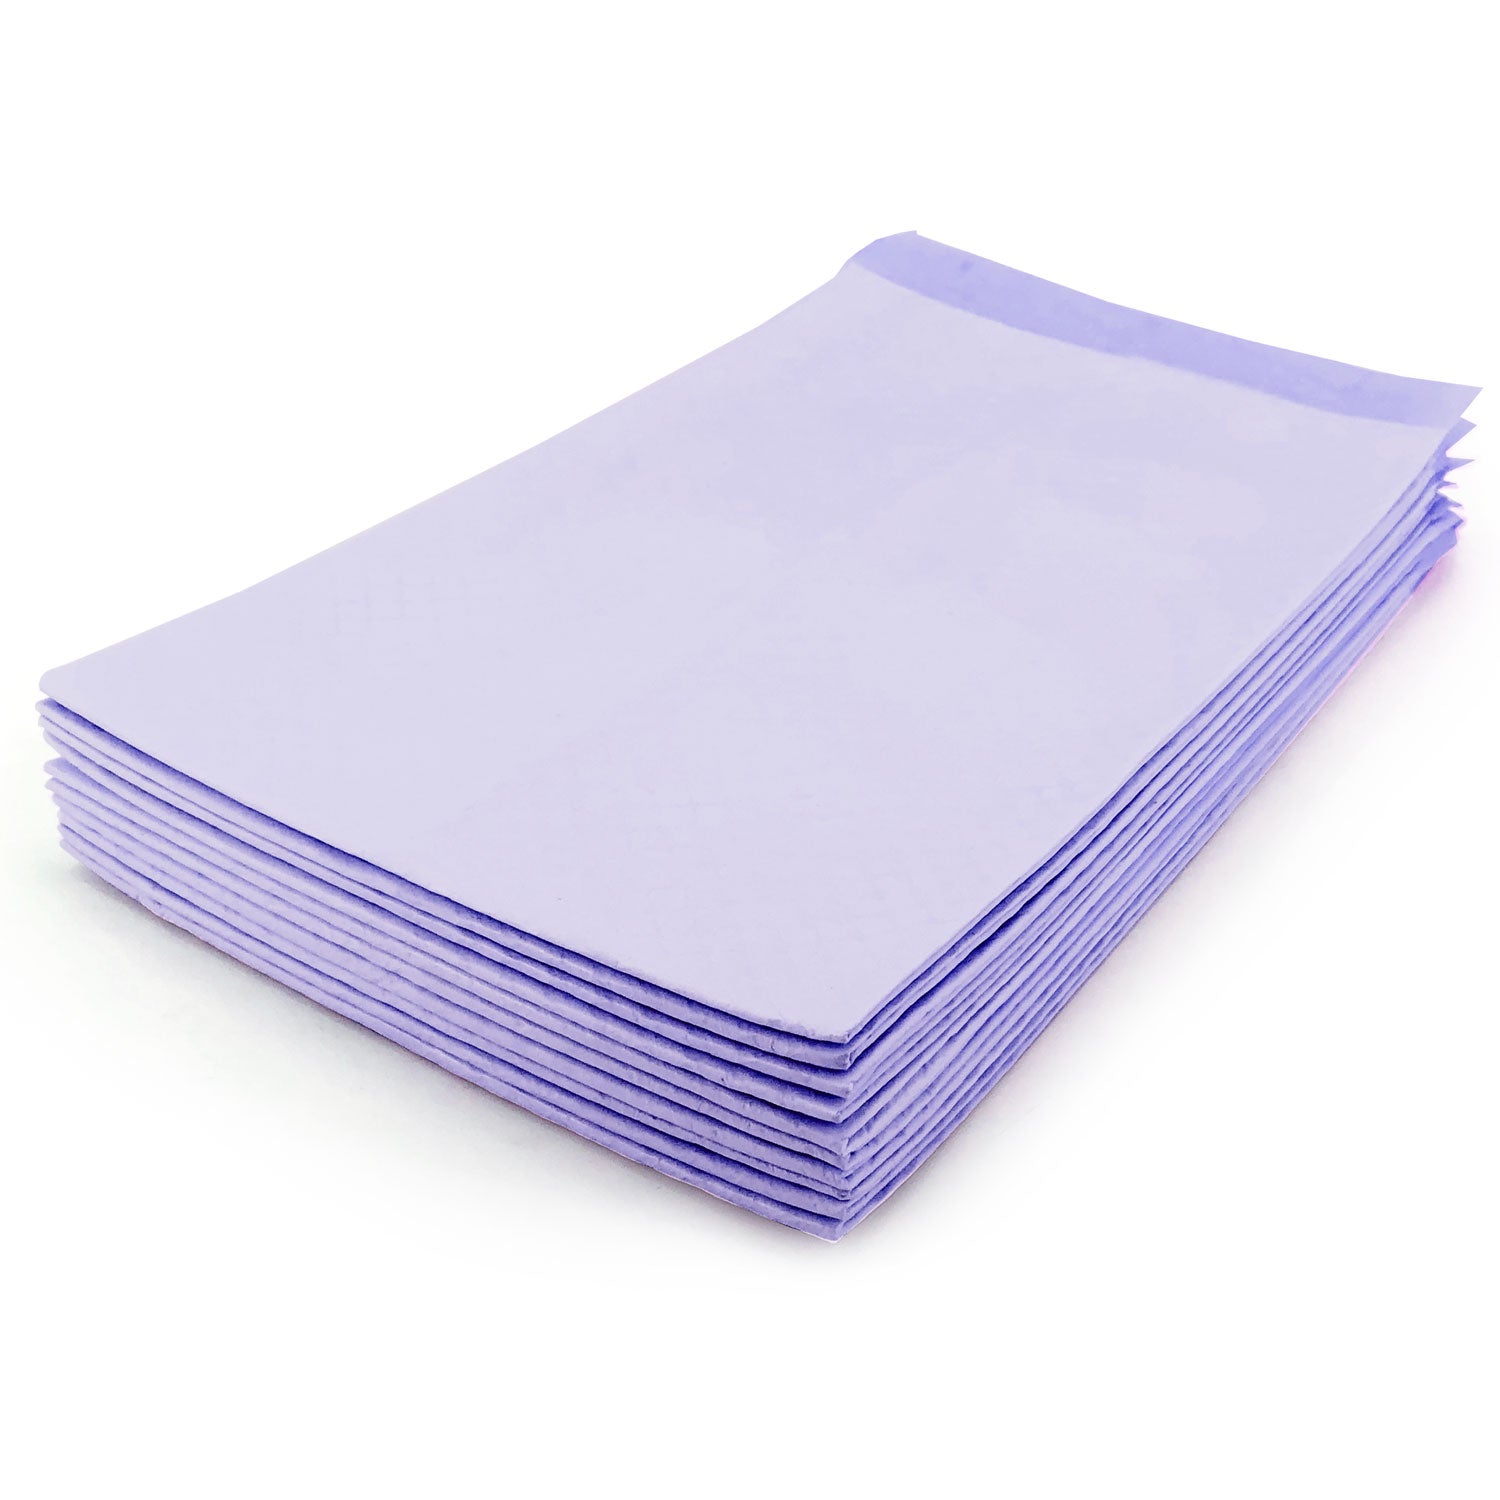 NEW- ValuePad Plus Puppy Pads, Extra Large 28"x36", Lavender Scent, 400 ct WHOLESALE PACK